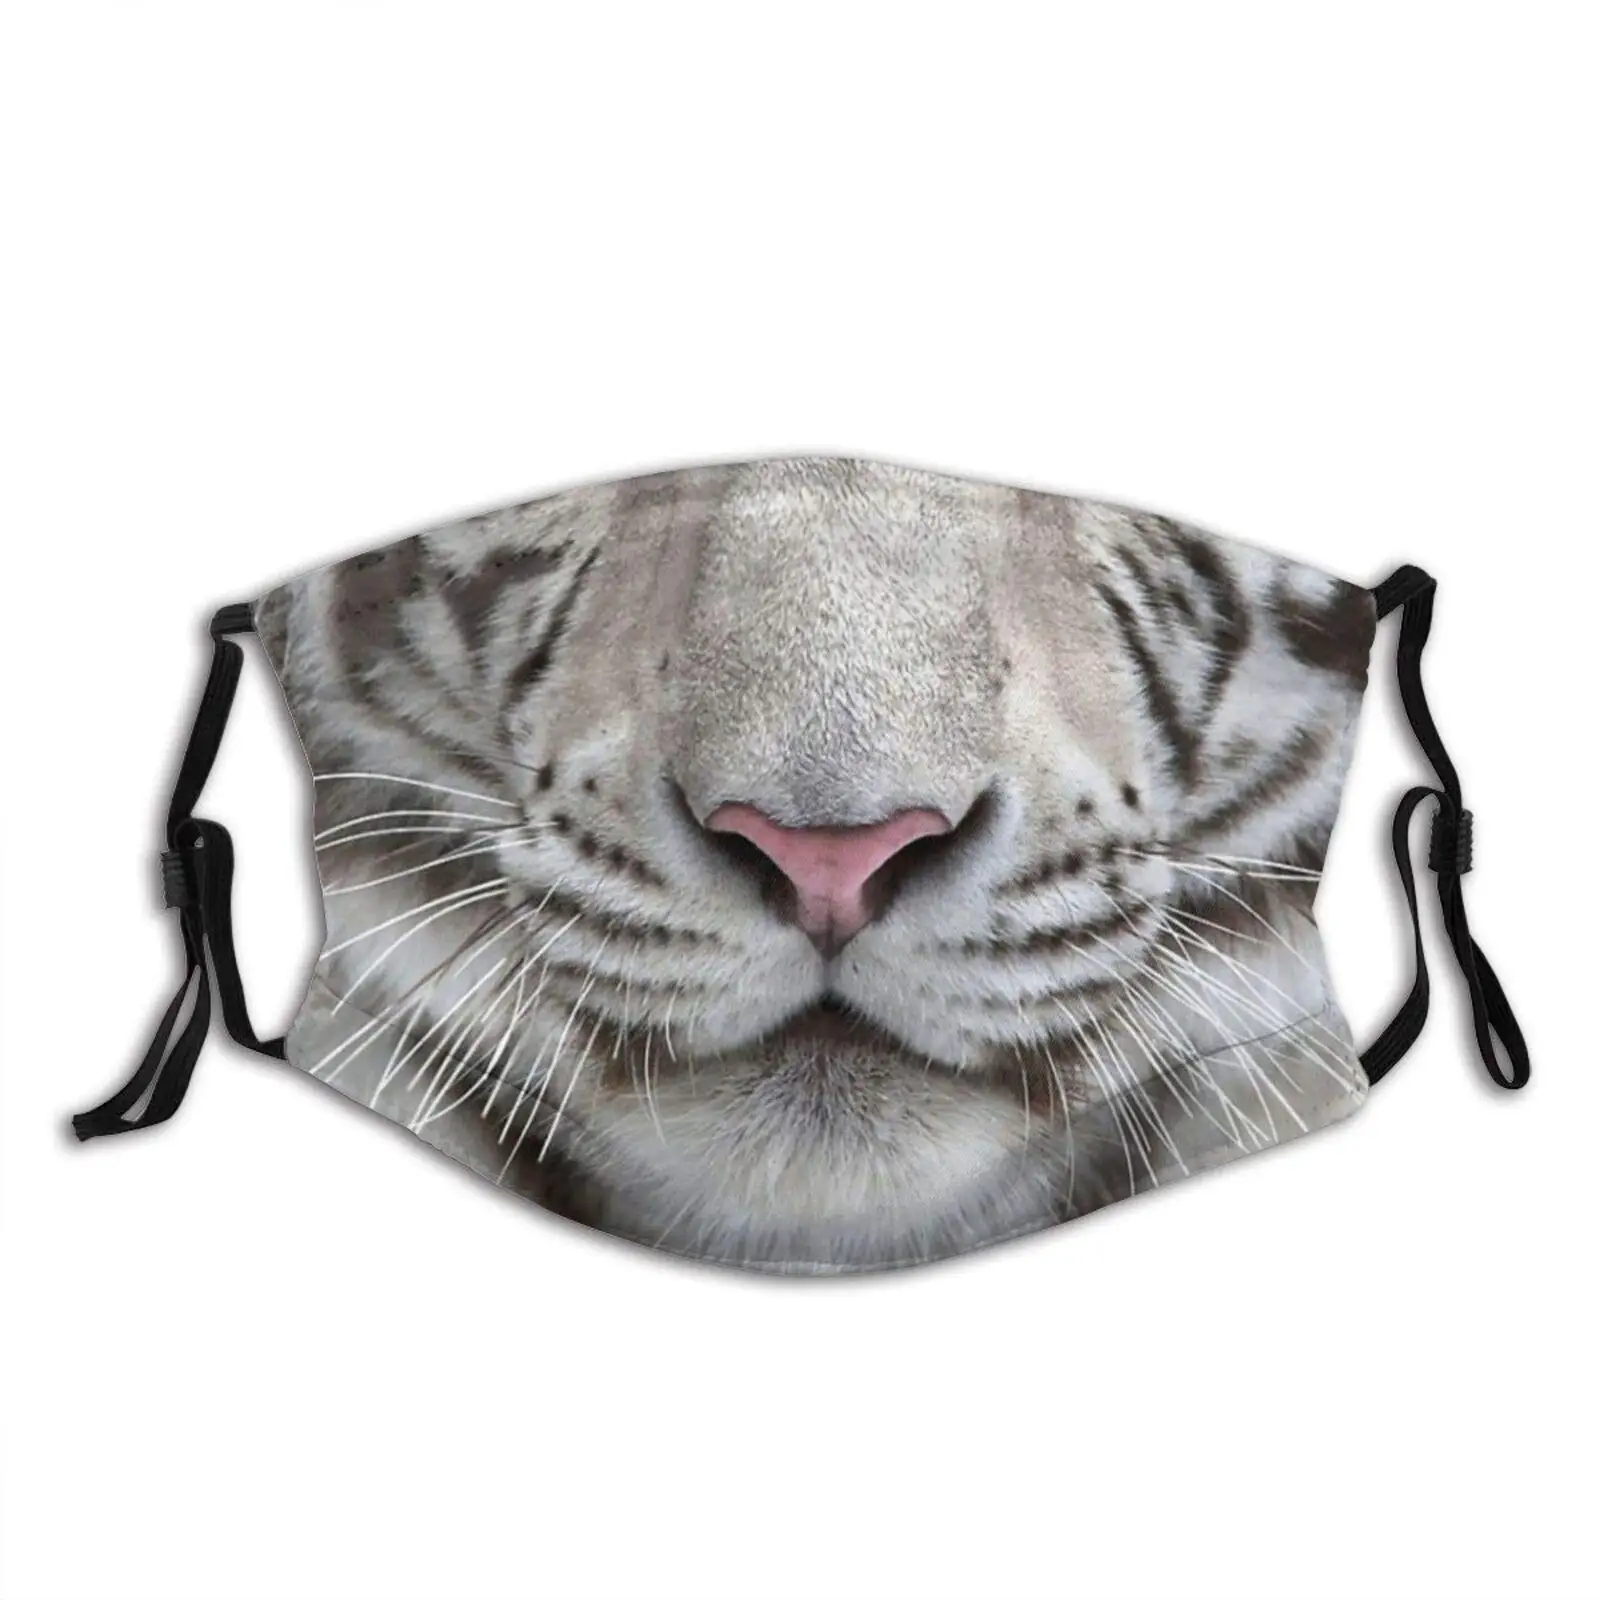 

White Tiger Face Mask Bandanas Balaclava, Washable Reusable With 2 Filters, For Man & Women